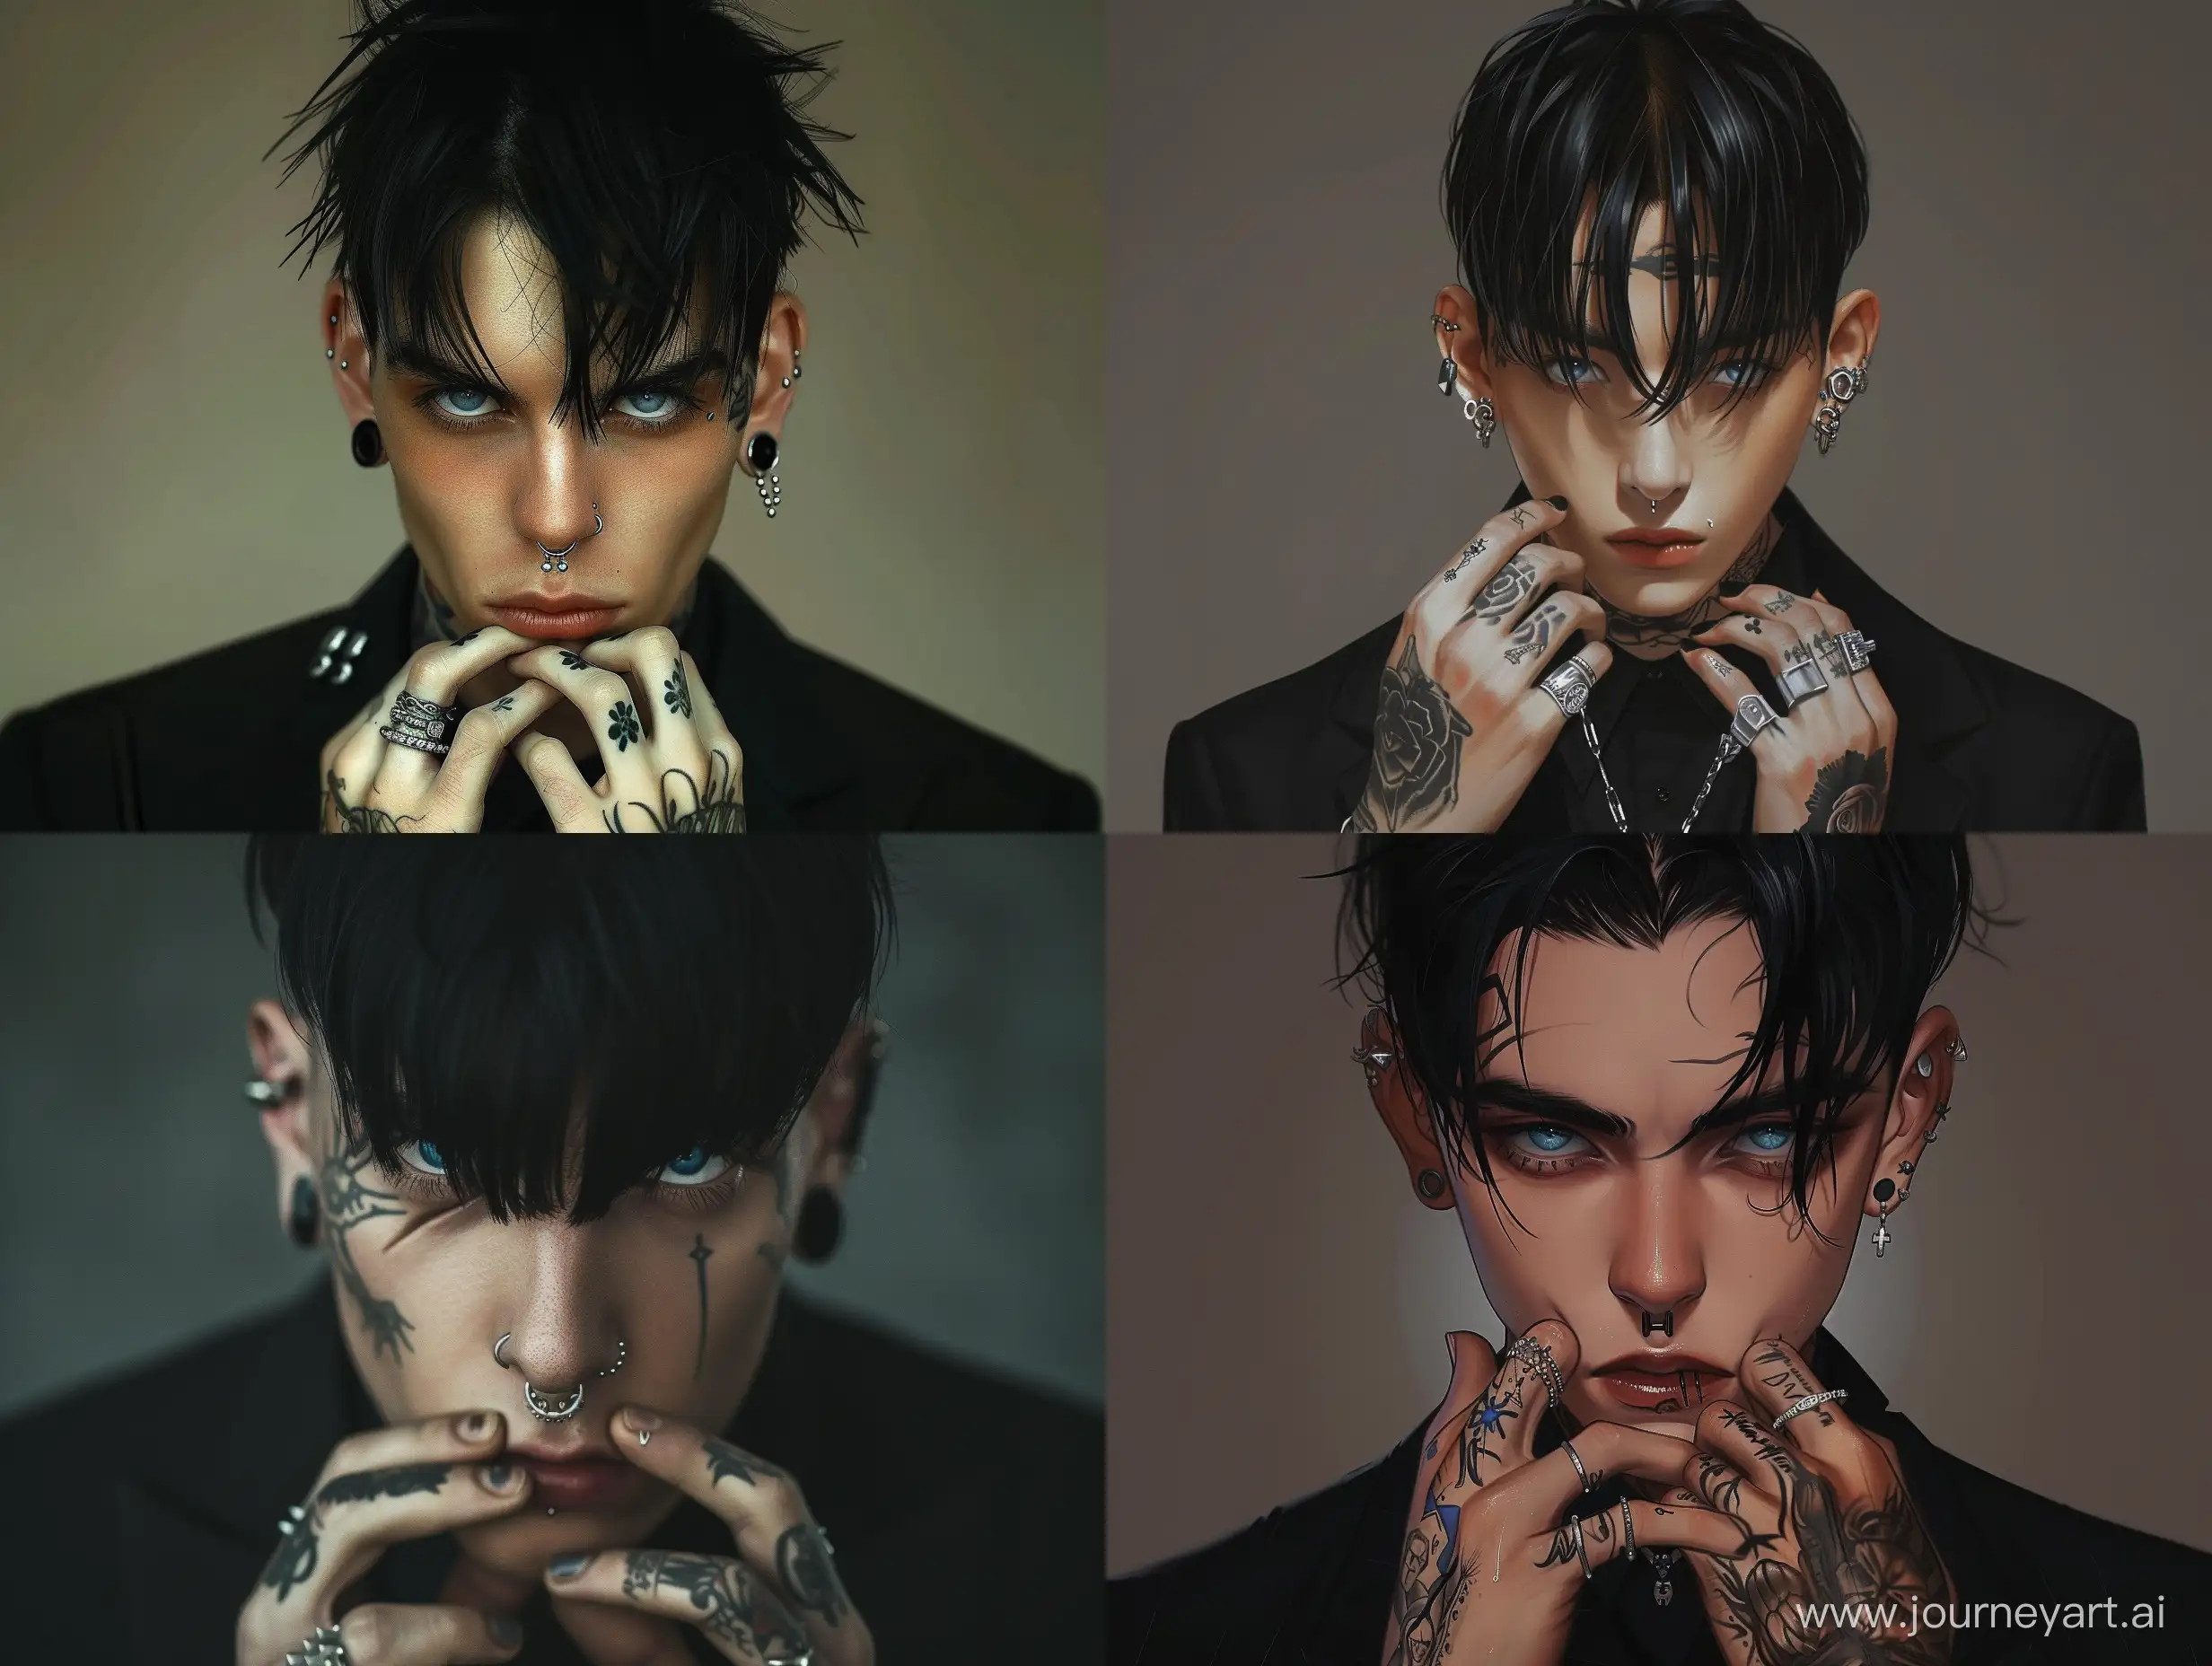 Young-Man-with-Edgy-Style-and-Tattoos-in-Black-Suit-Portrait